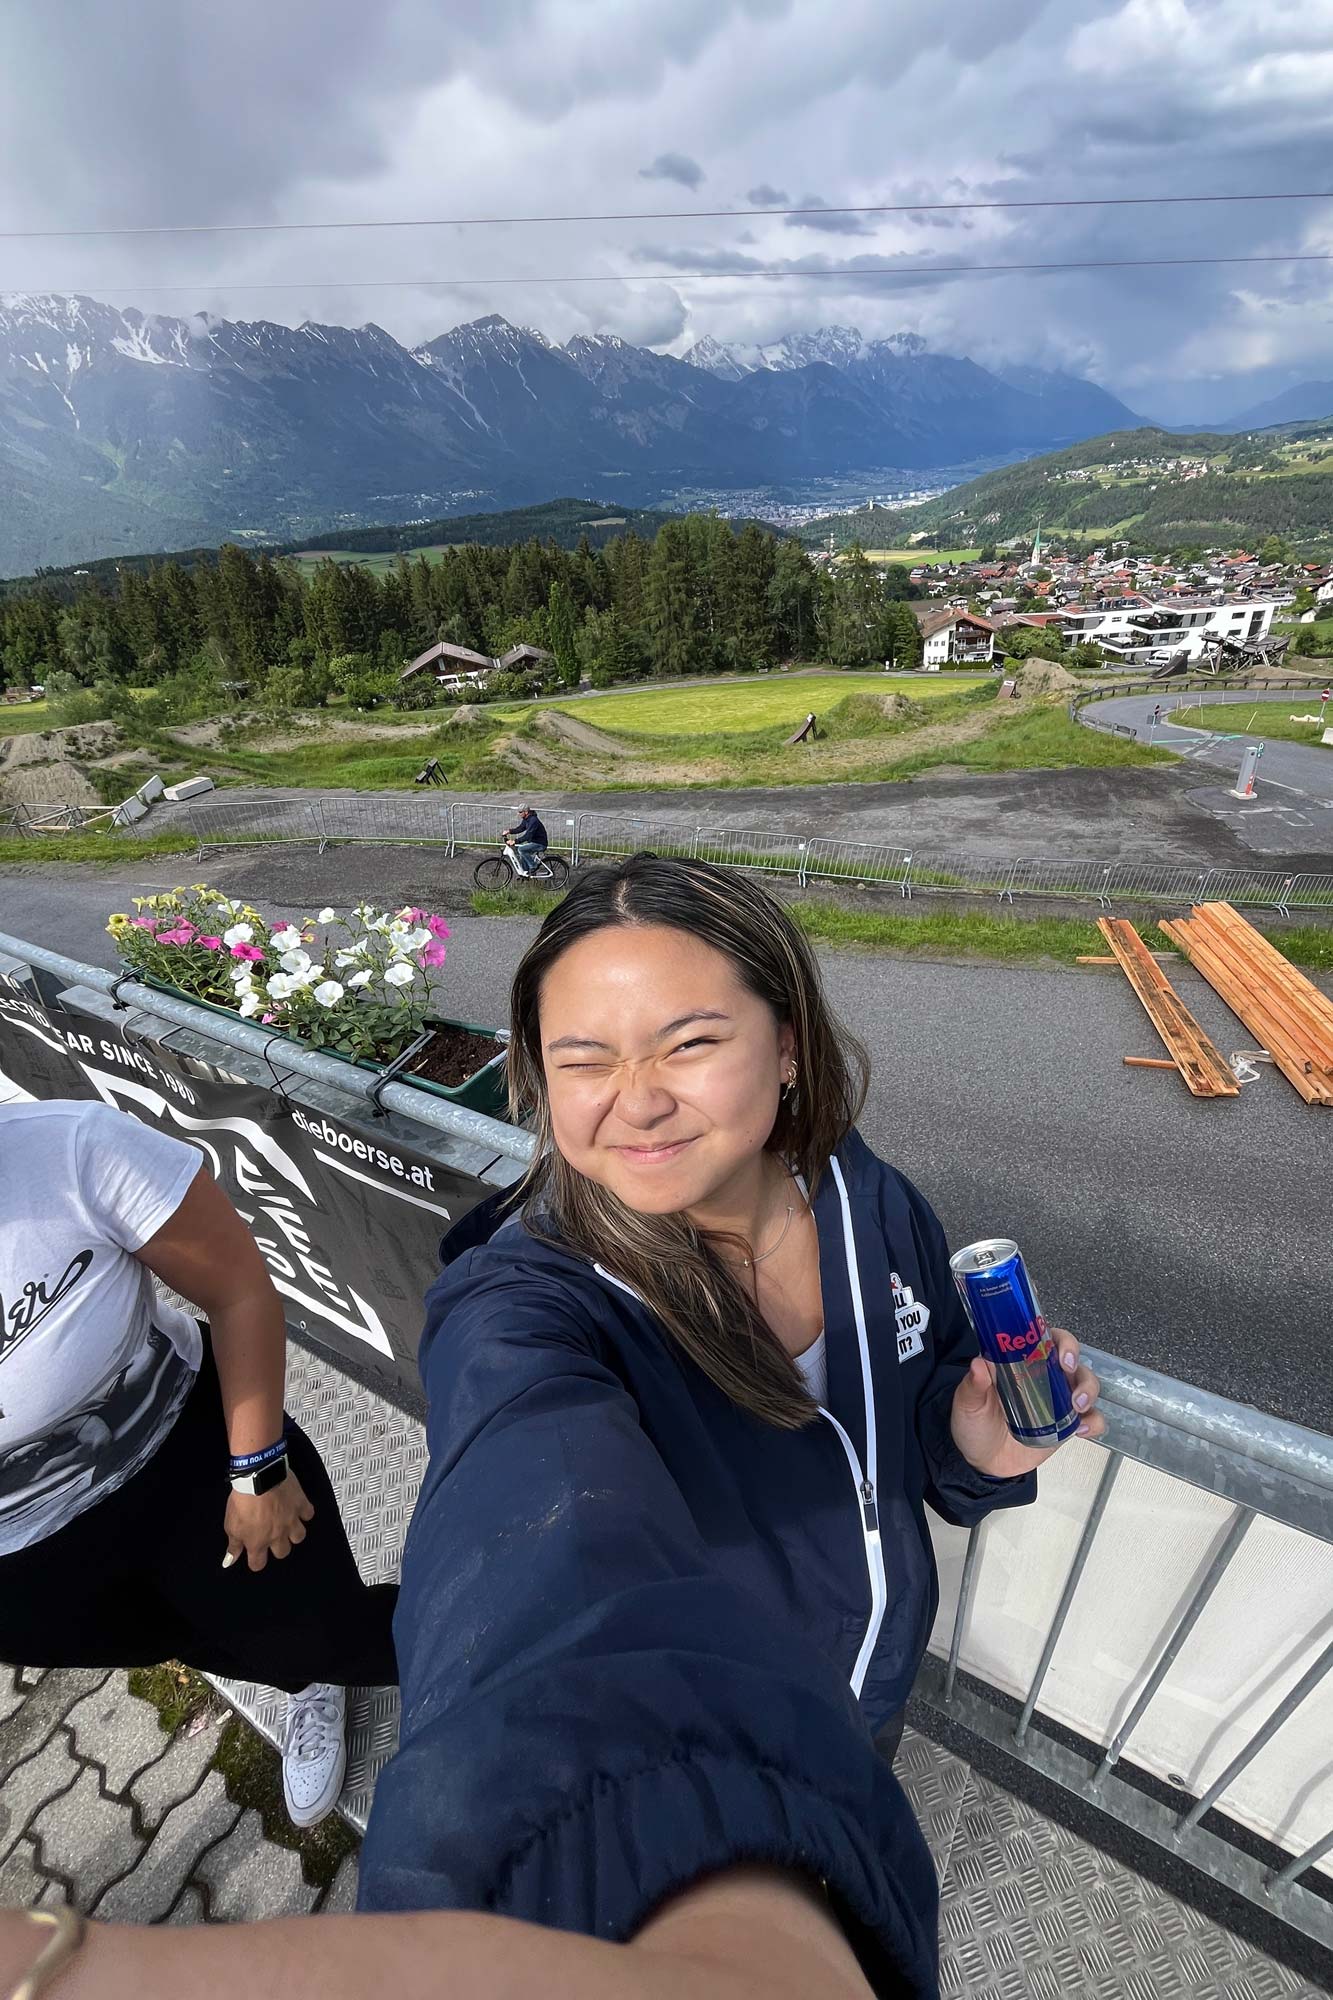 Selfie of Khuyen (in navy jacket, holding Red Bull can and with mountains in background)